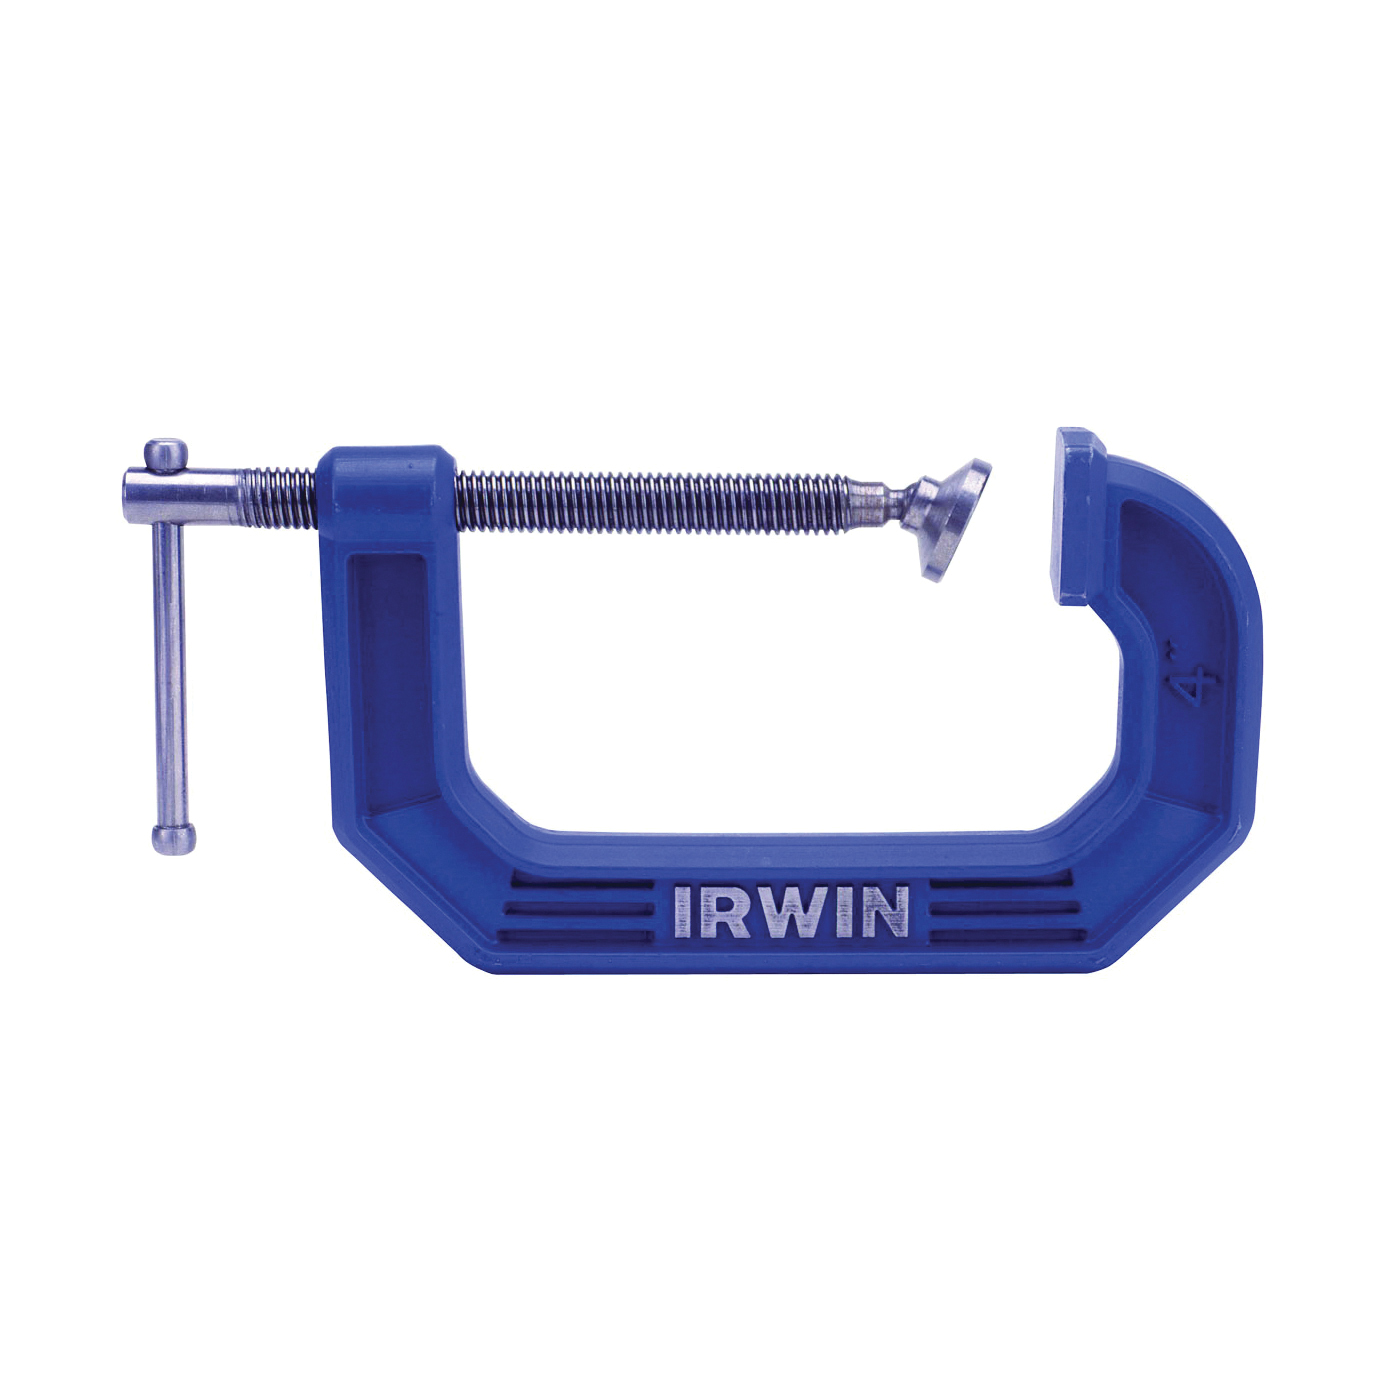 2025102 C-Clamp, 10 lb Clamping, 2-1/2 in Max Opening Size, 1-3/8 in D Throat, Steel Body, Blue Body